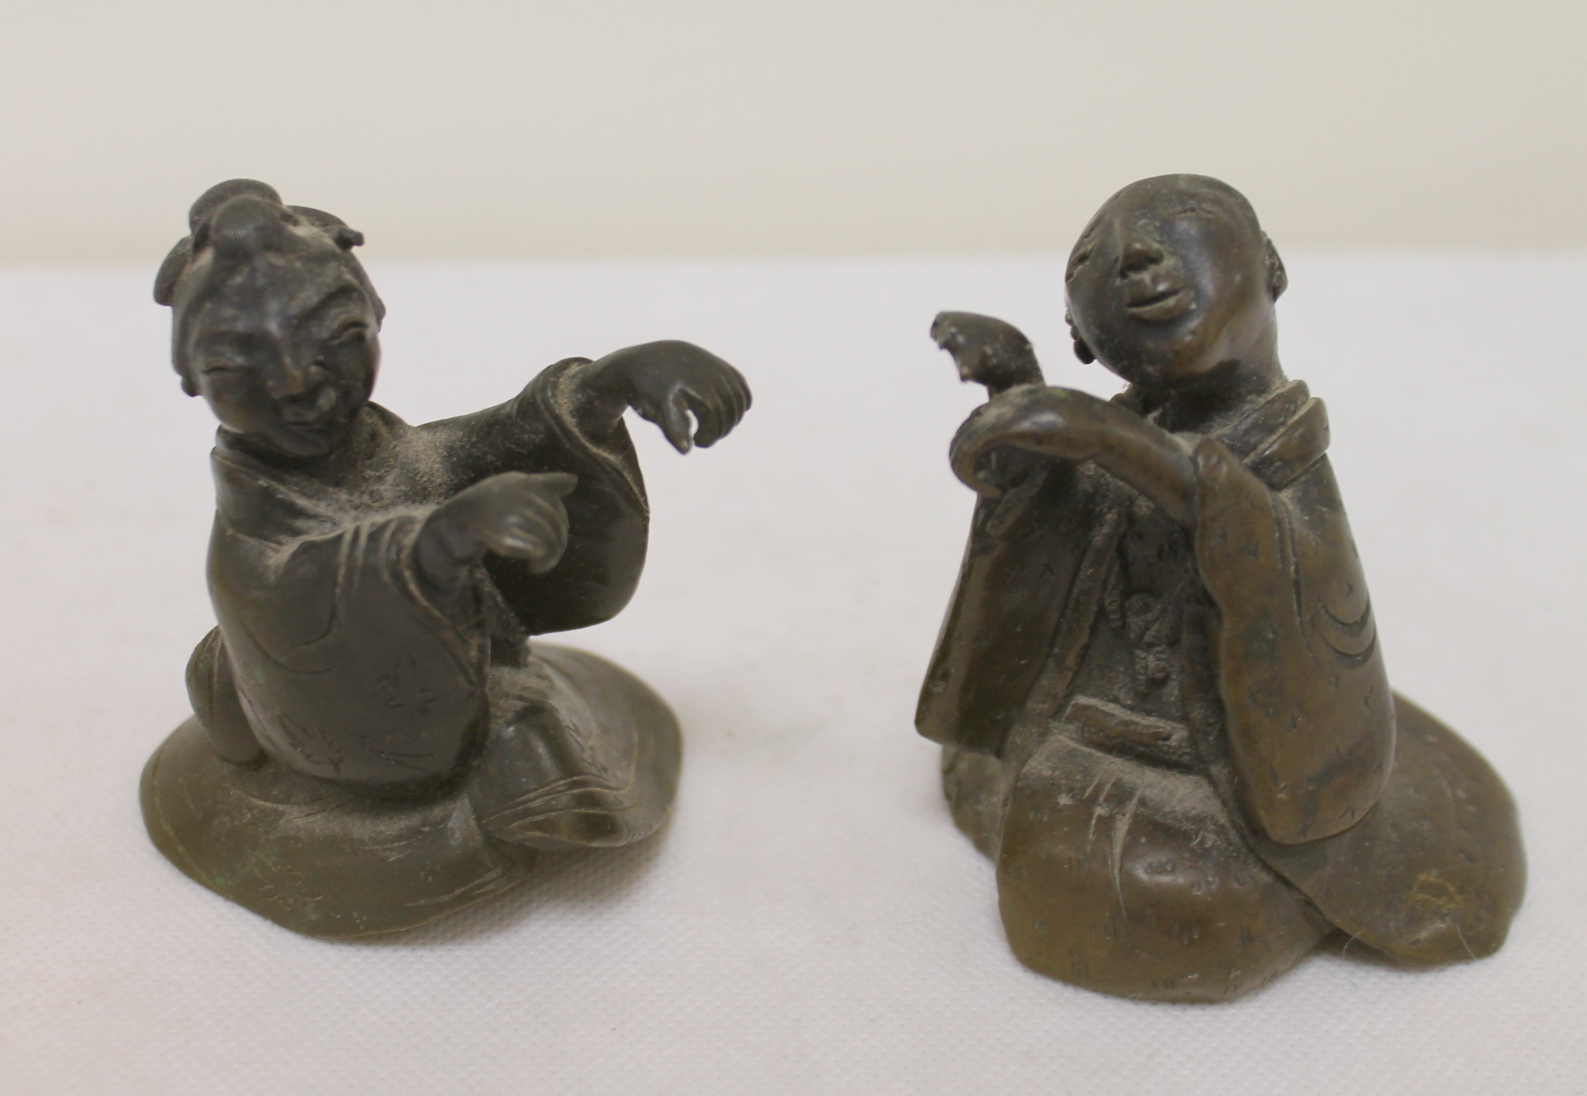 Pair of Meiji period Japanese bronze figures of a geisha and her companion,